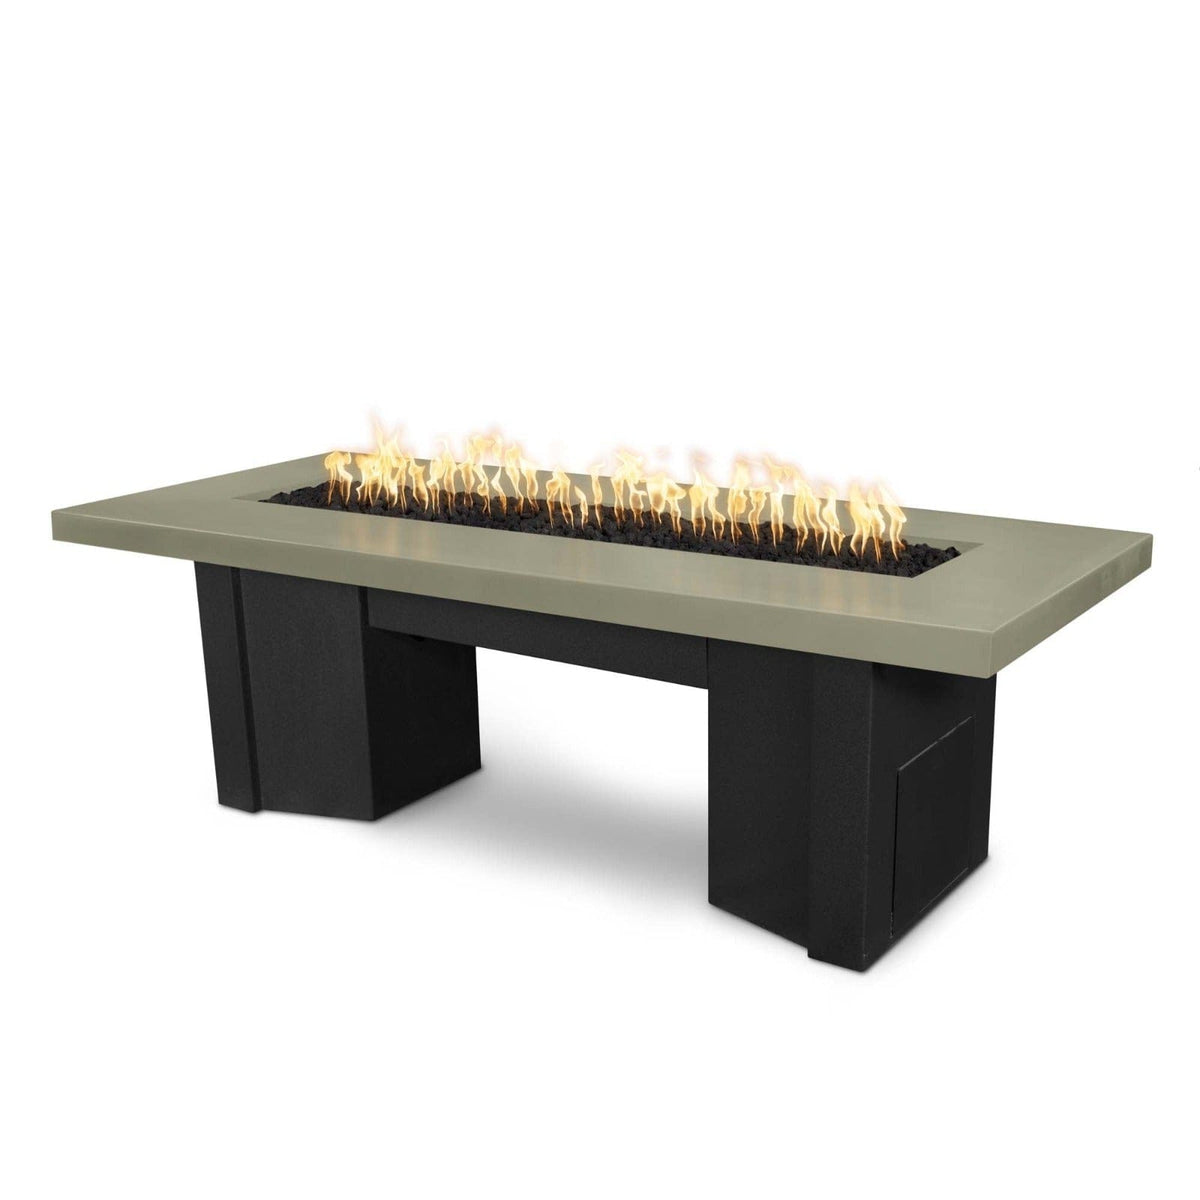 The Outdoor Plus Fire Features Ash (-ASH) / Black Powder Coated Steel (-BLK) The Outdoor Plus 78&quot; Alameda Fire Table Smooth Concrete in Liquid Propane - Flame Sense System with Push Button Spark Igniter / OPT-ALMGFRC78FSEN-LP